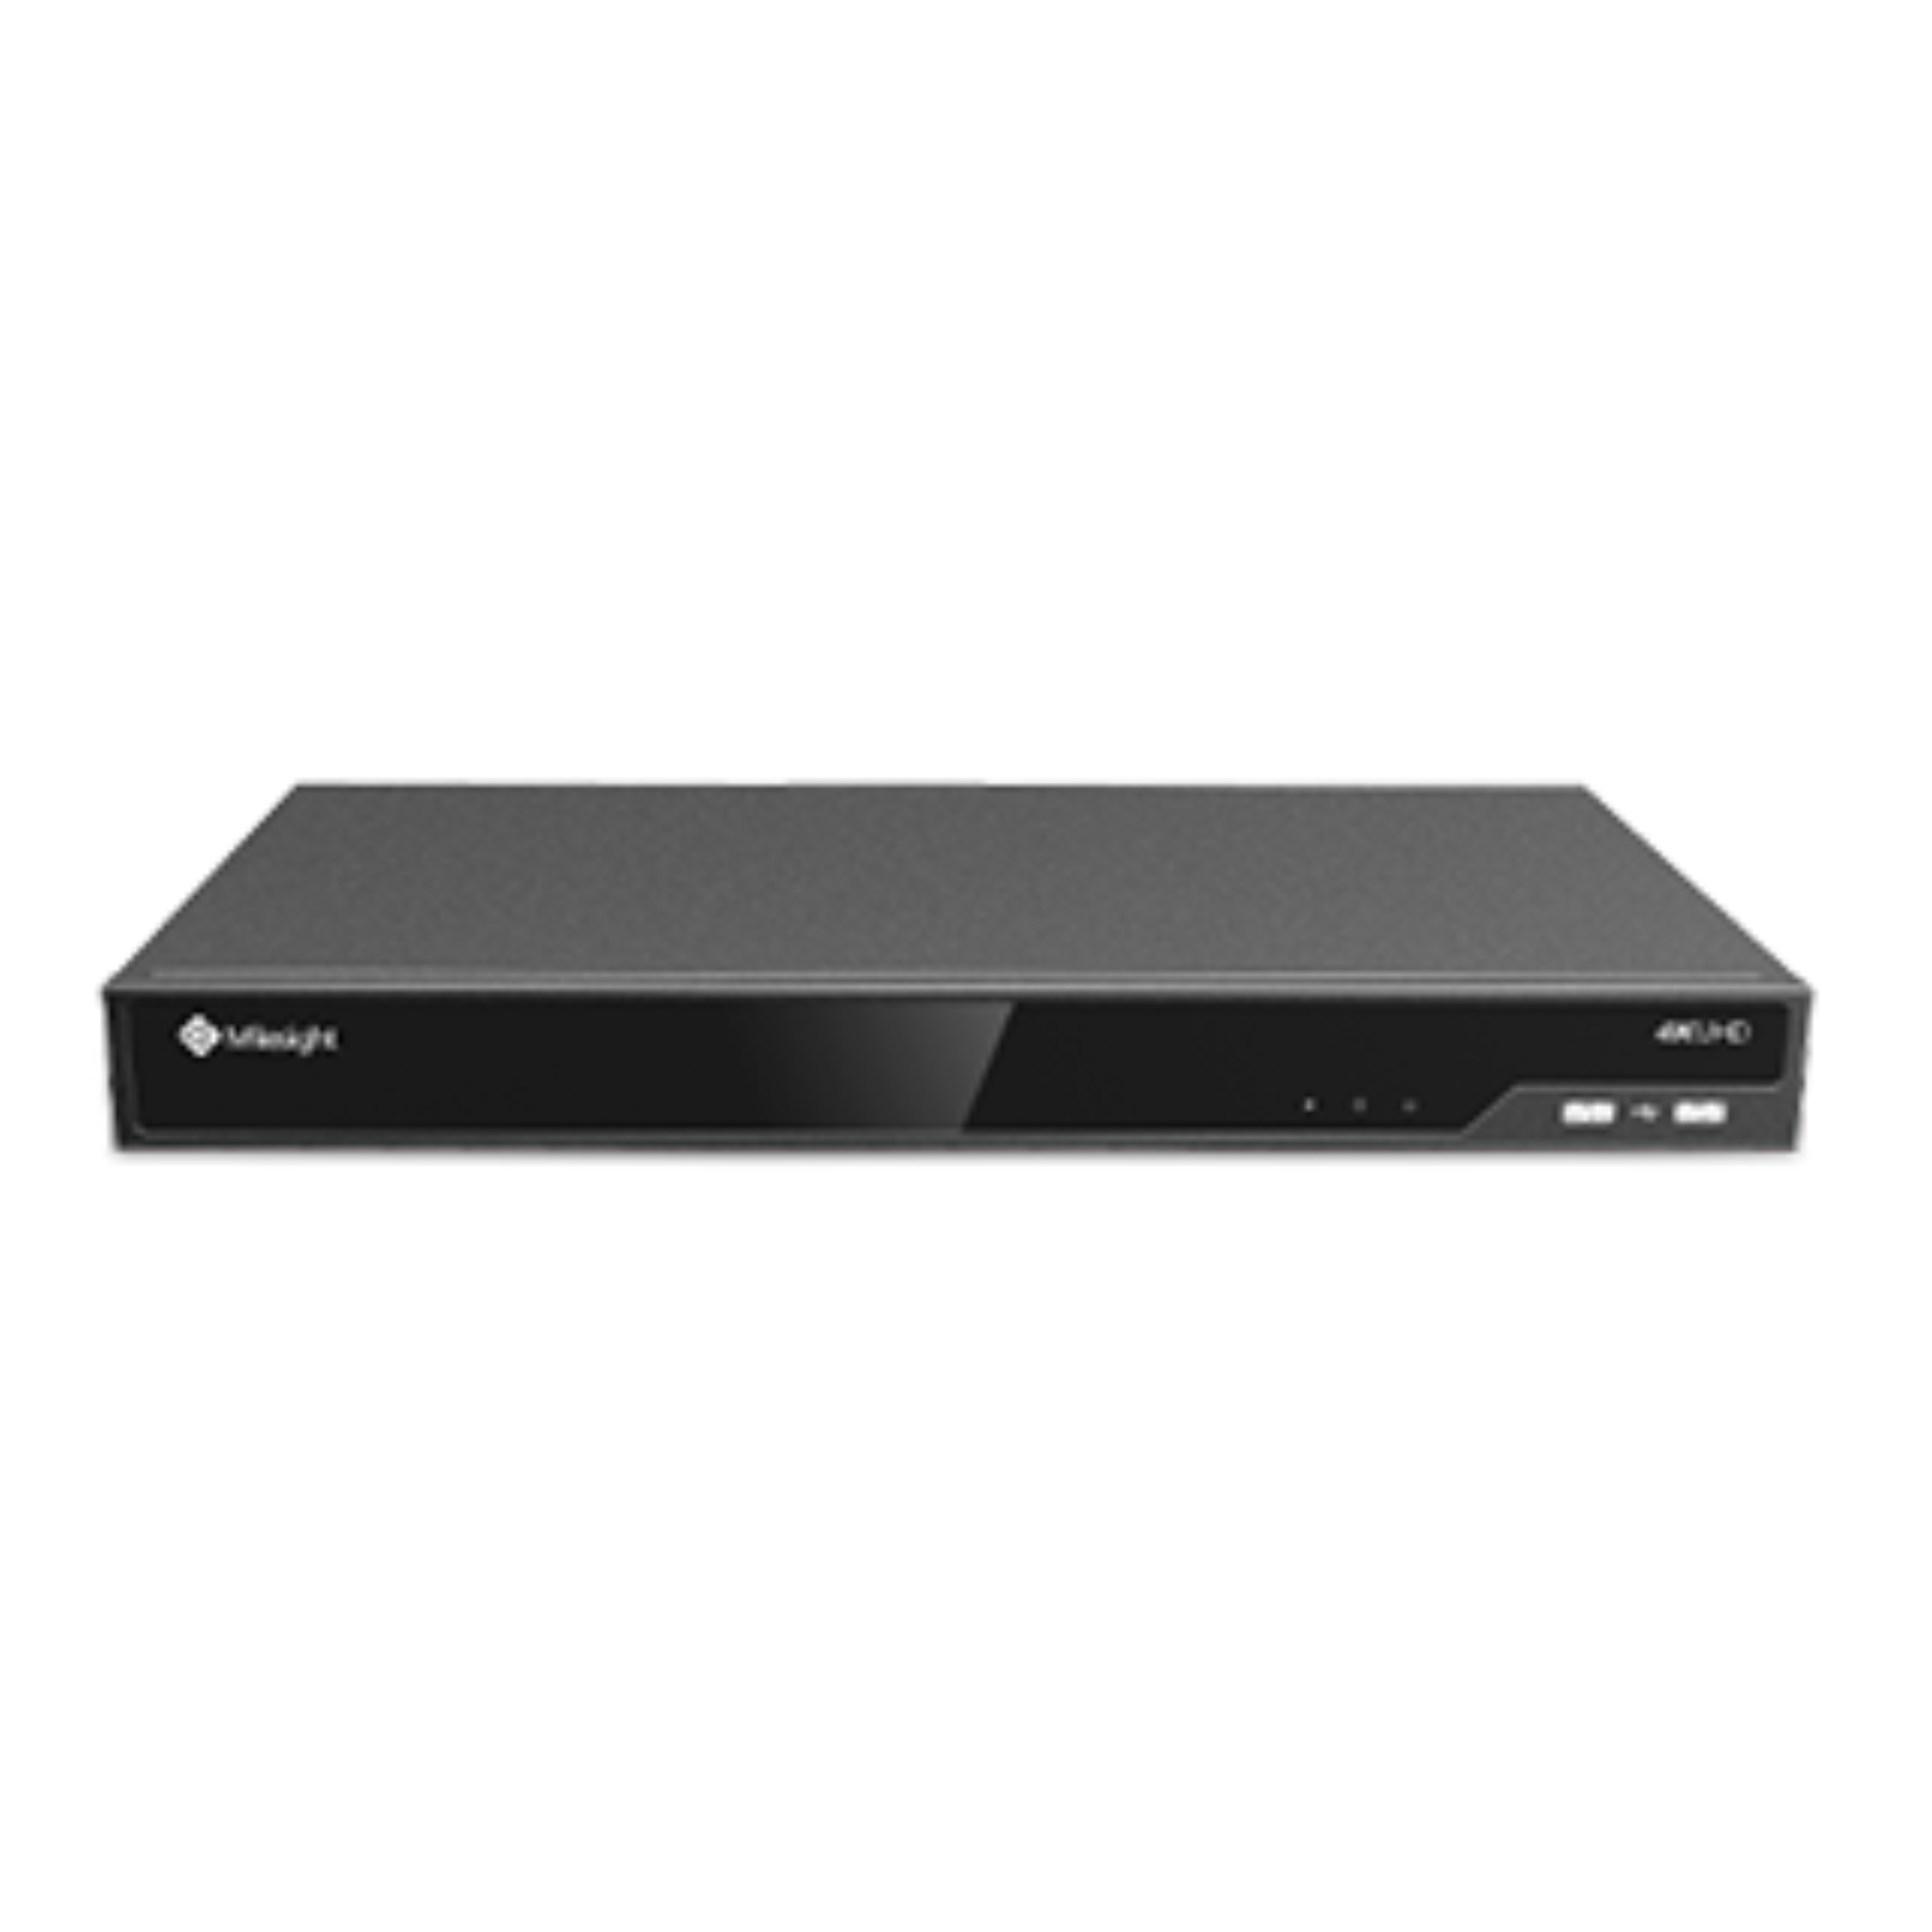 16-Channel Pro H.265 NVR with 16 POE Ports and Up to 20TB Storage